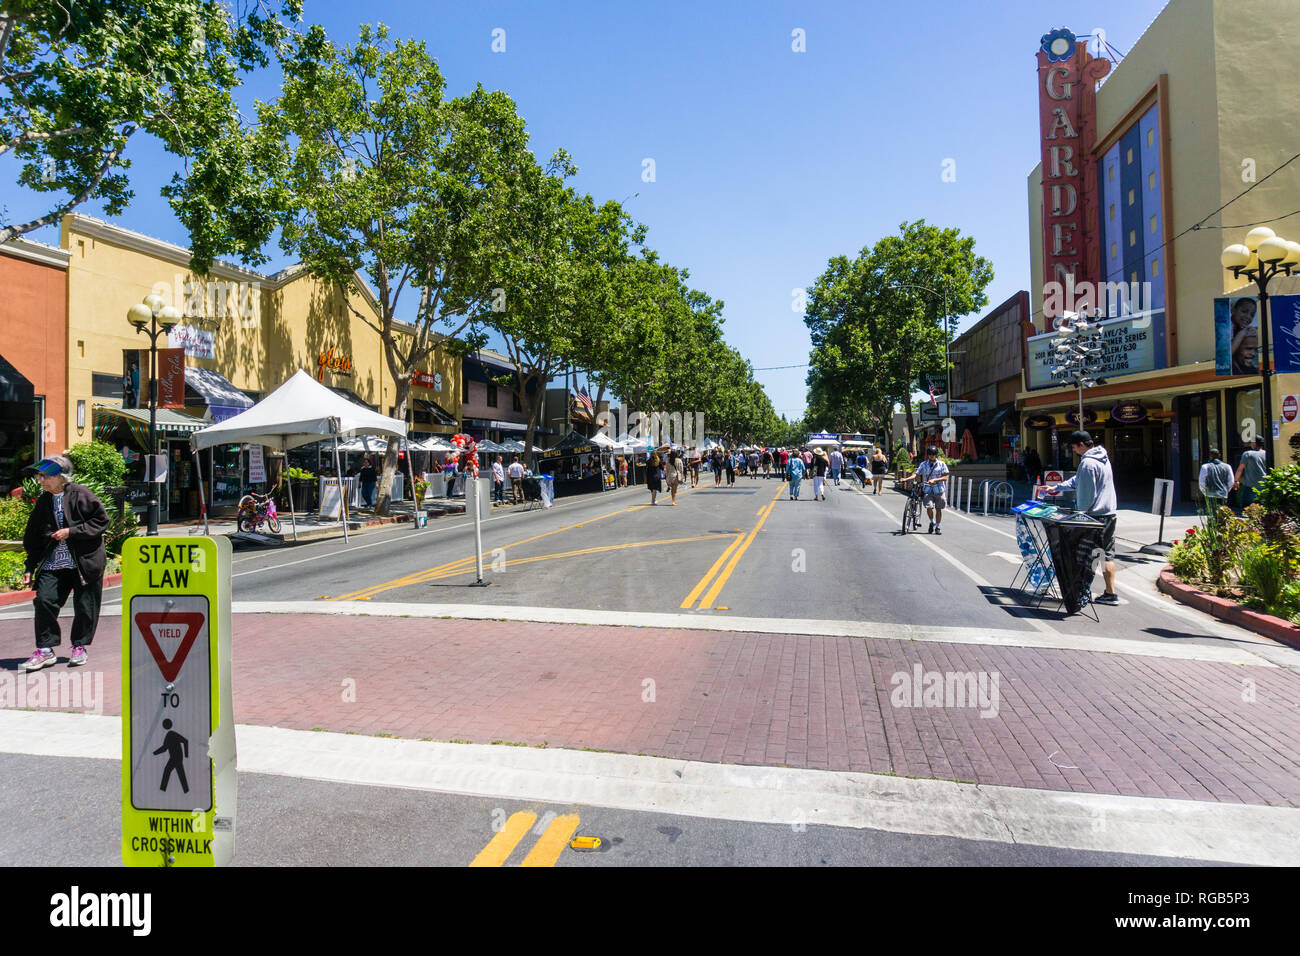 June 16, 2018 San Jose / CA / USA - People visiting the “Dancin’ On The Avenue” Live Music Block Party in downtown Willow Glen, South San Francisco Ba Stock Photo